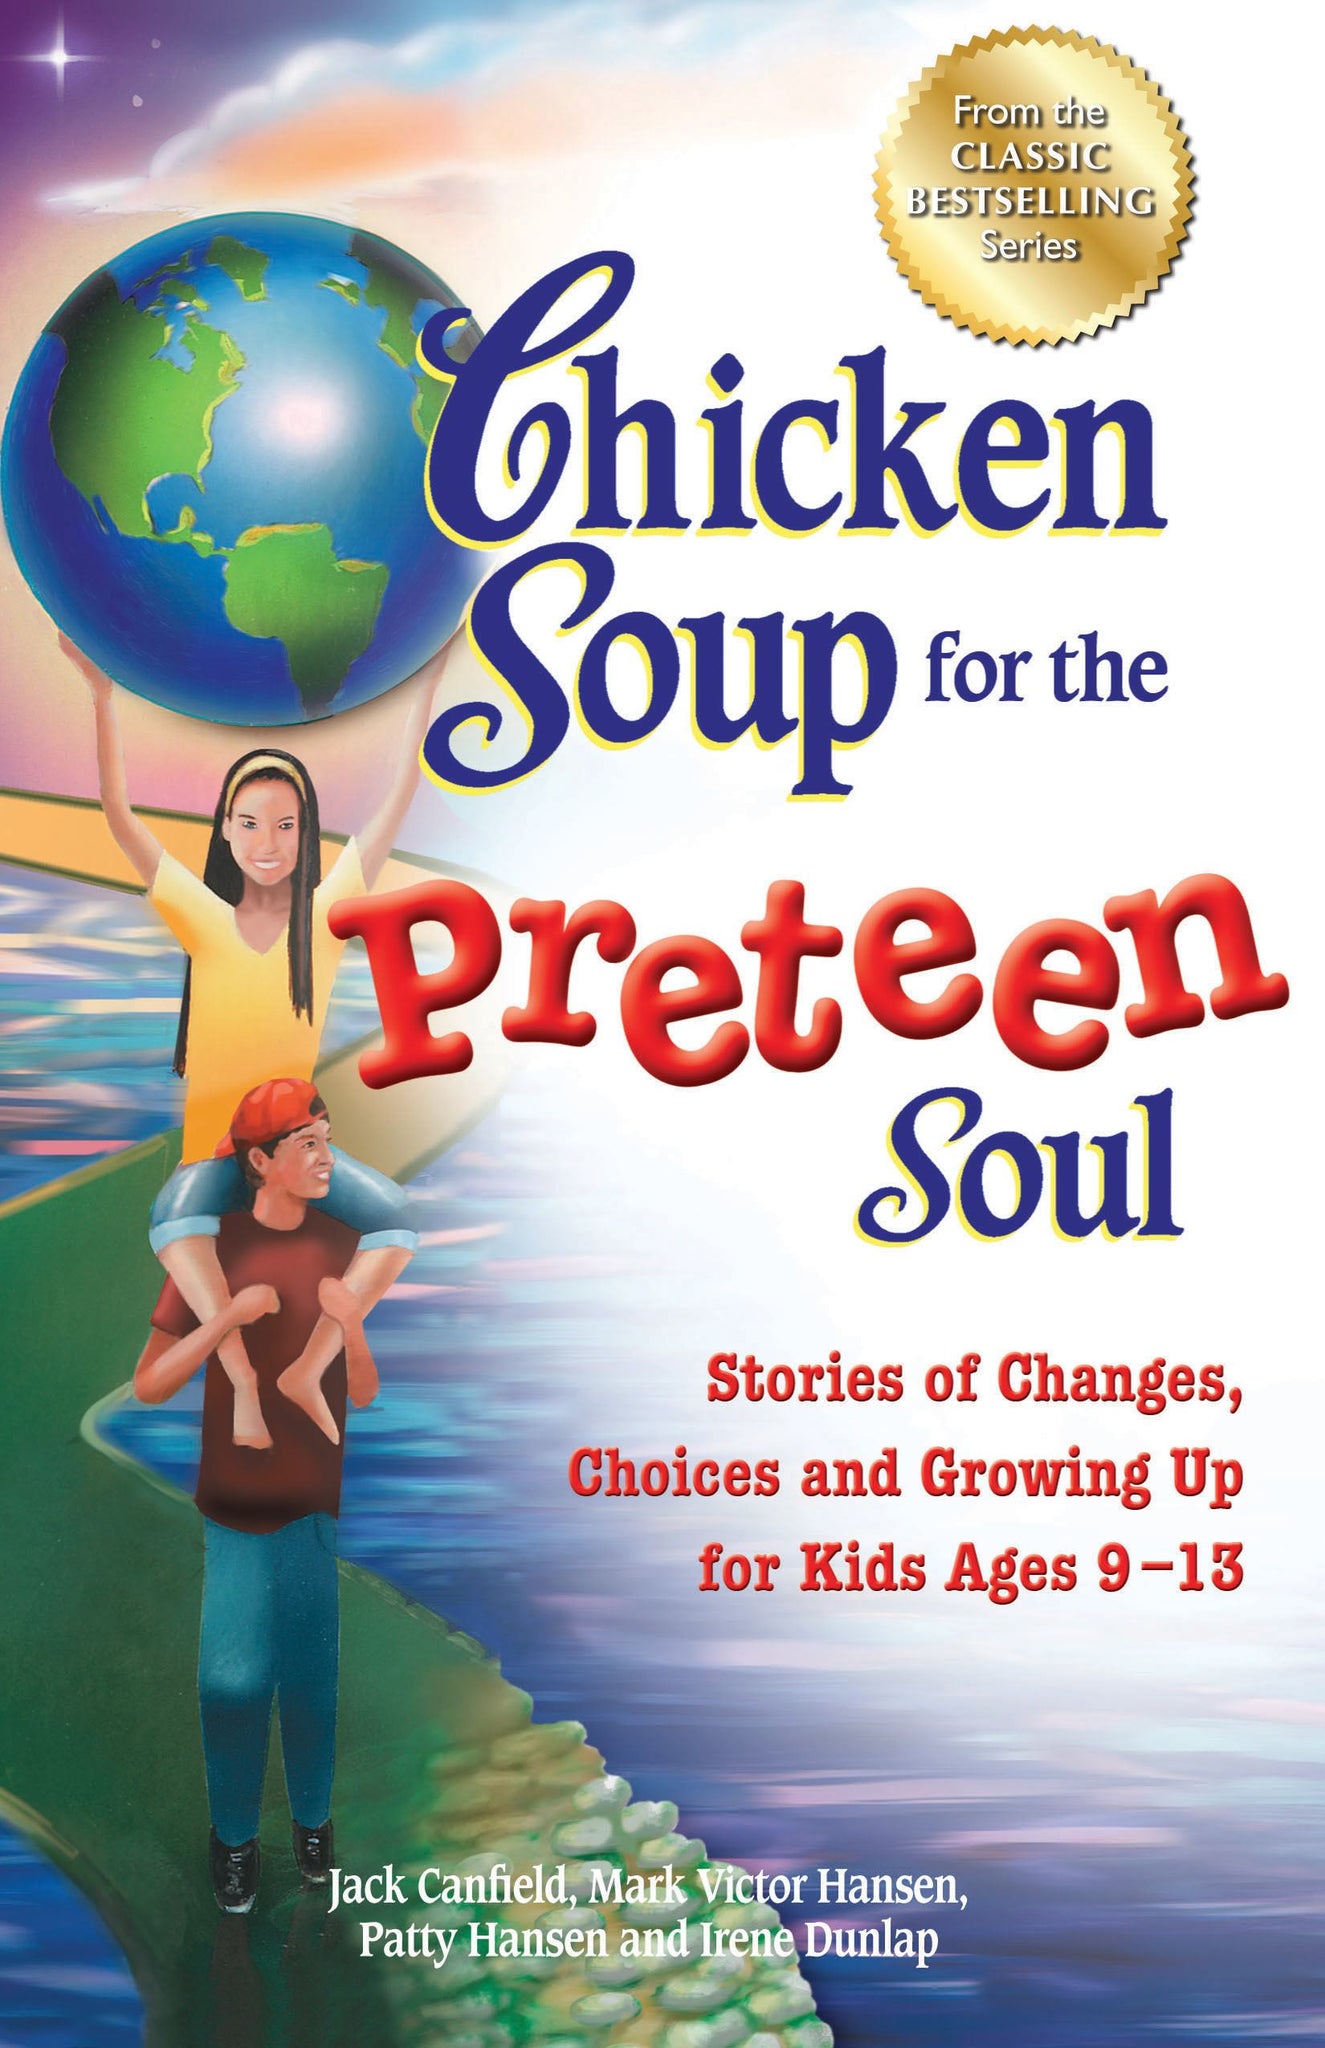 Chicken Soup for the Preteen Soul : Stories of Changes, Choices and Growing Up for Kids Ages 9-13